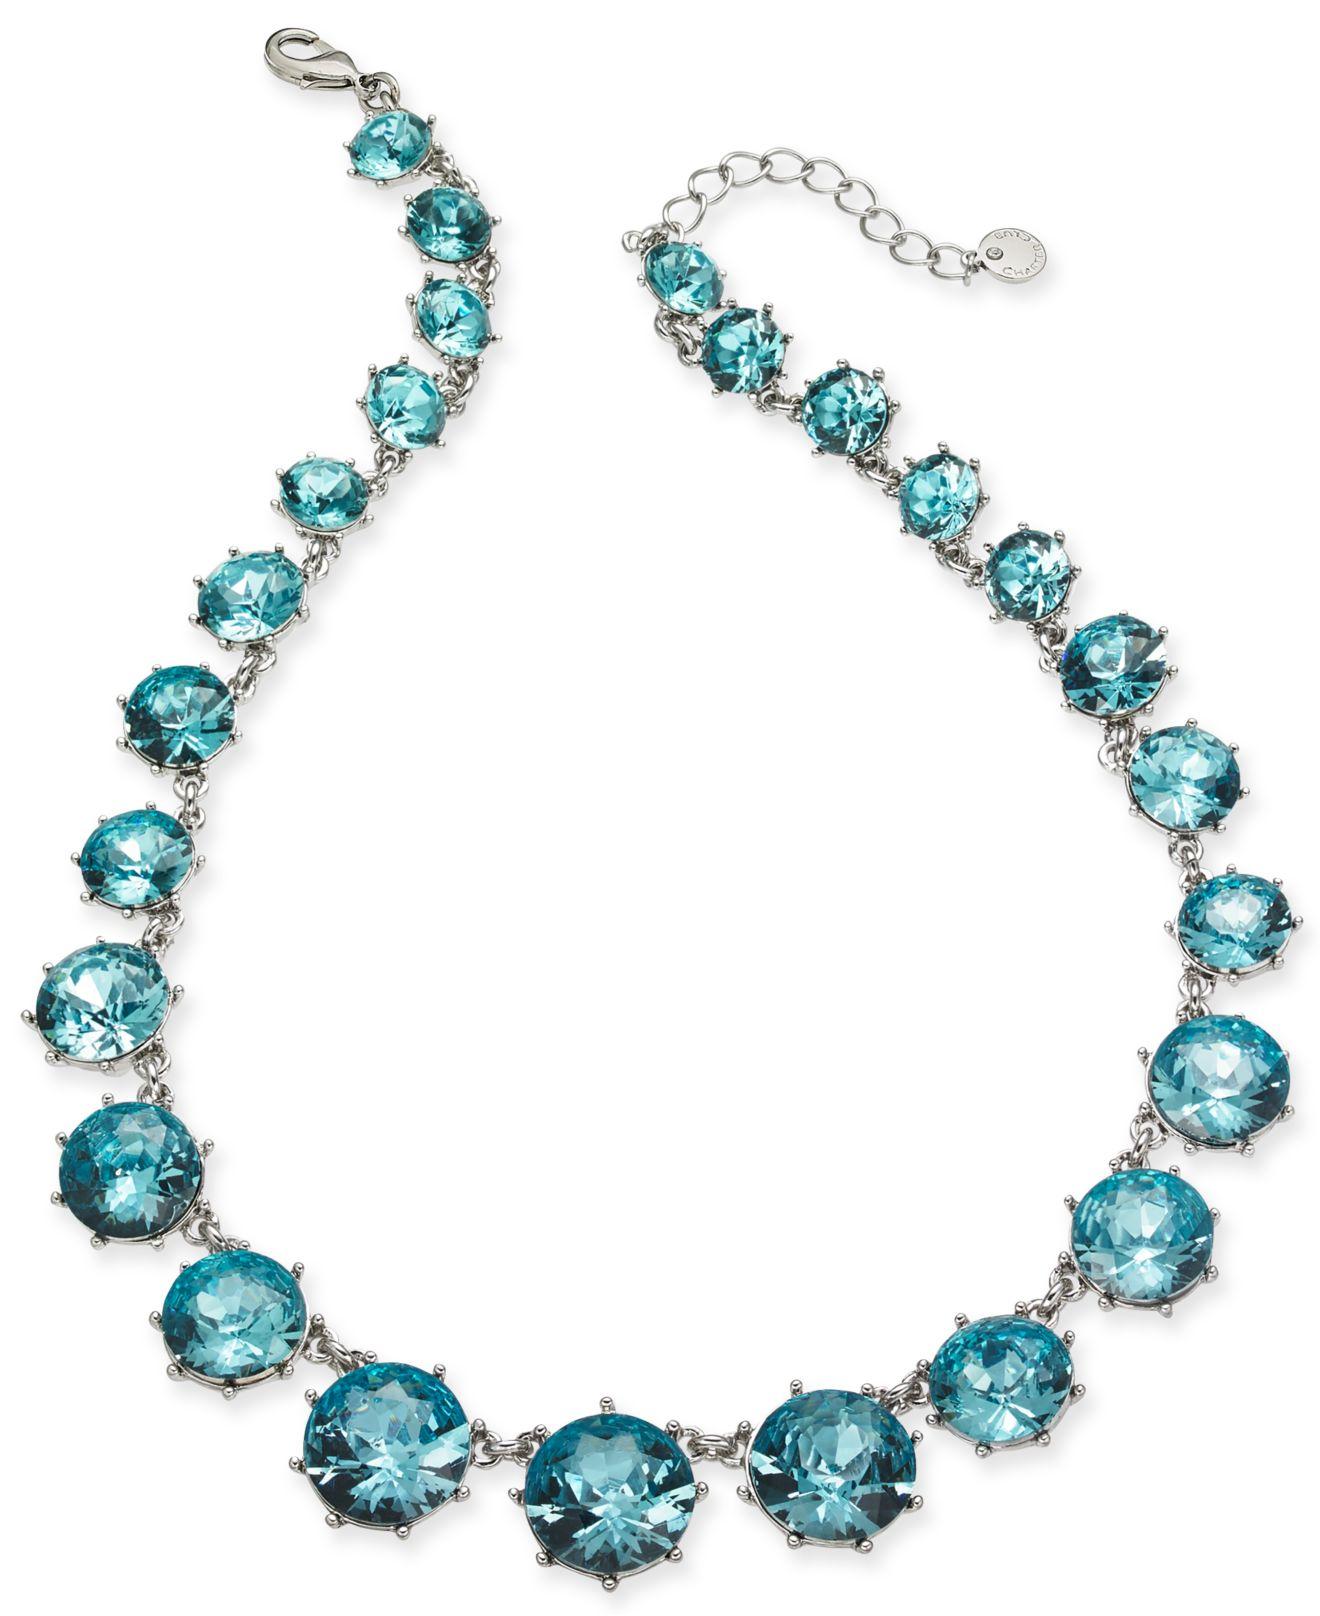 Charter Club Stone Collar Necklace, 17